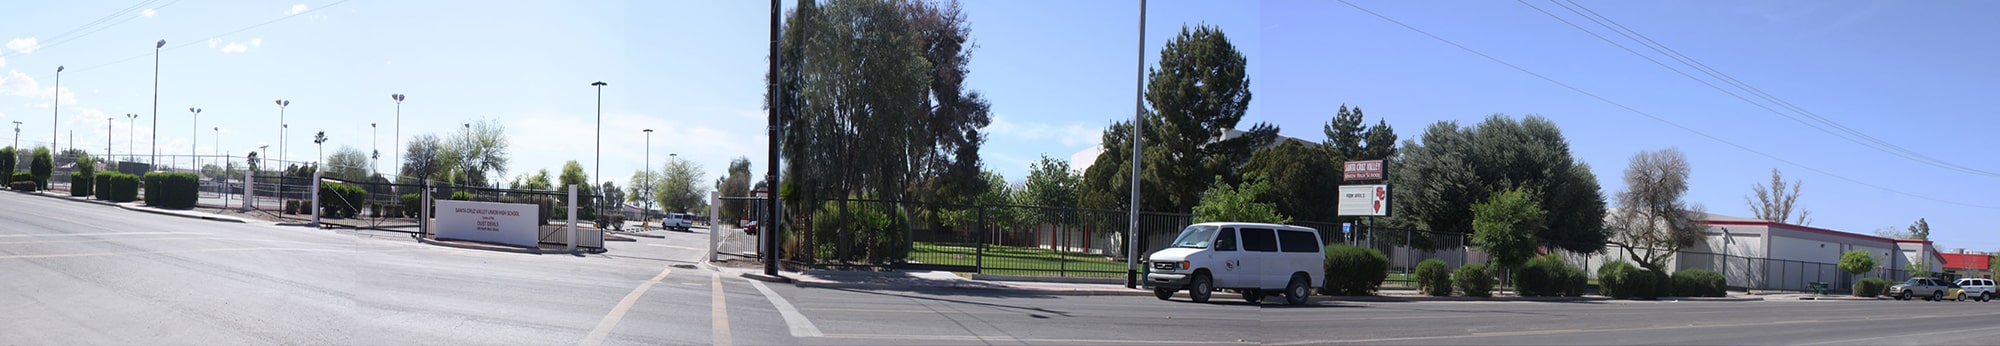 Panoramic view of the school campus